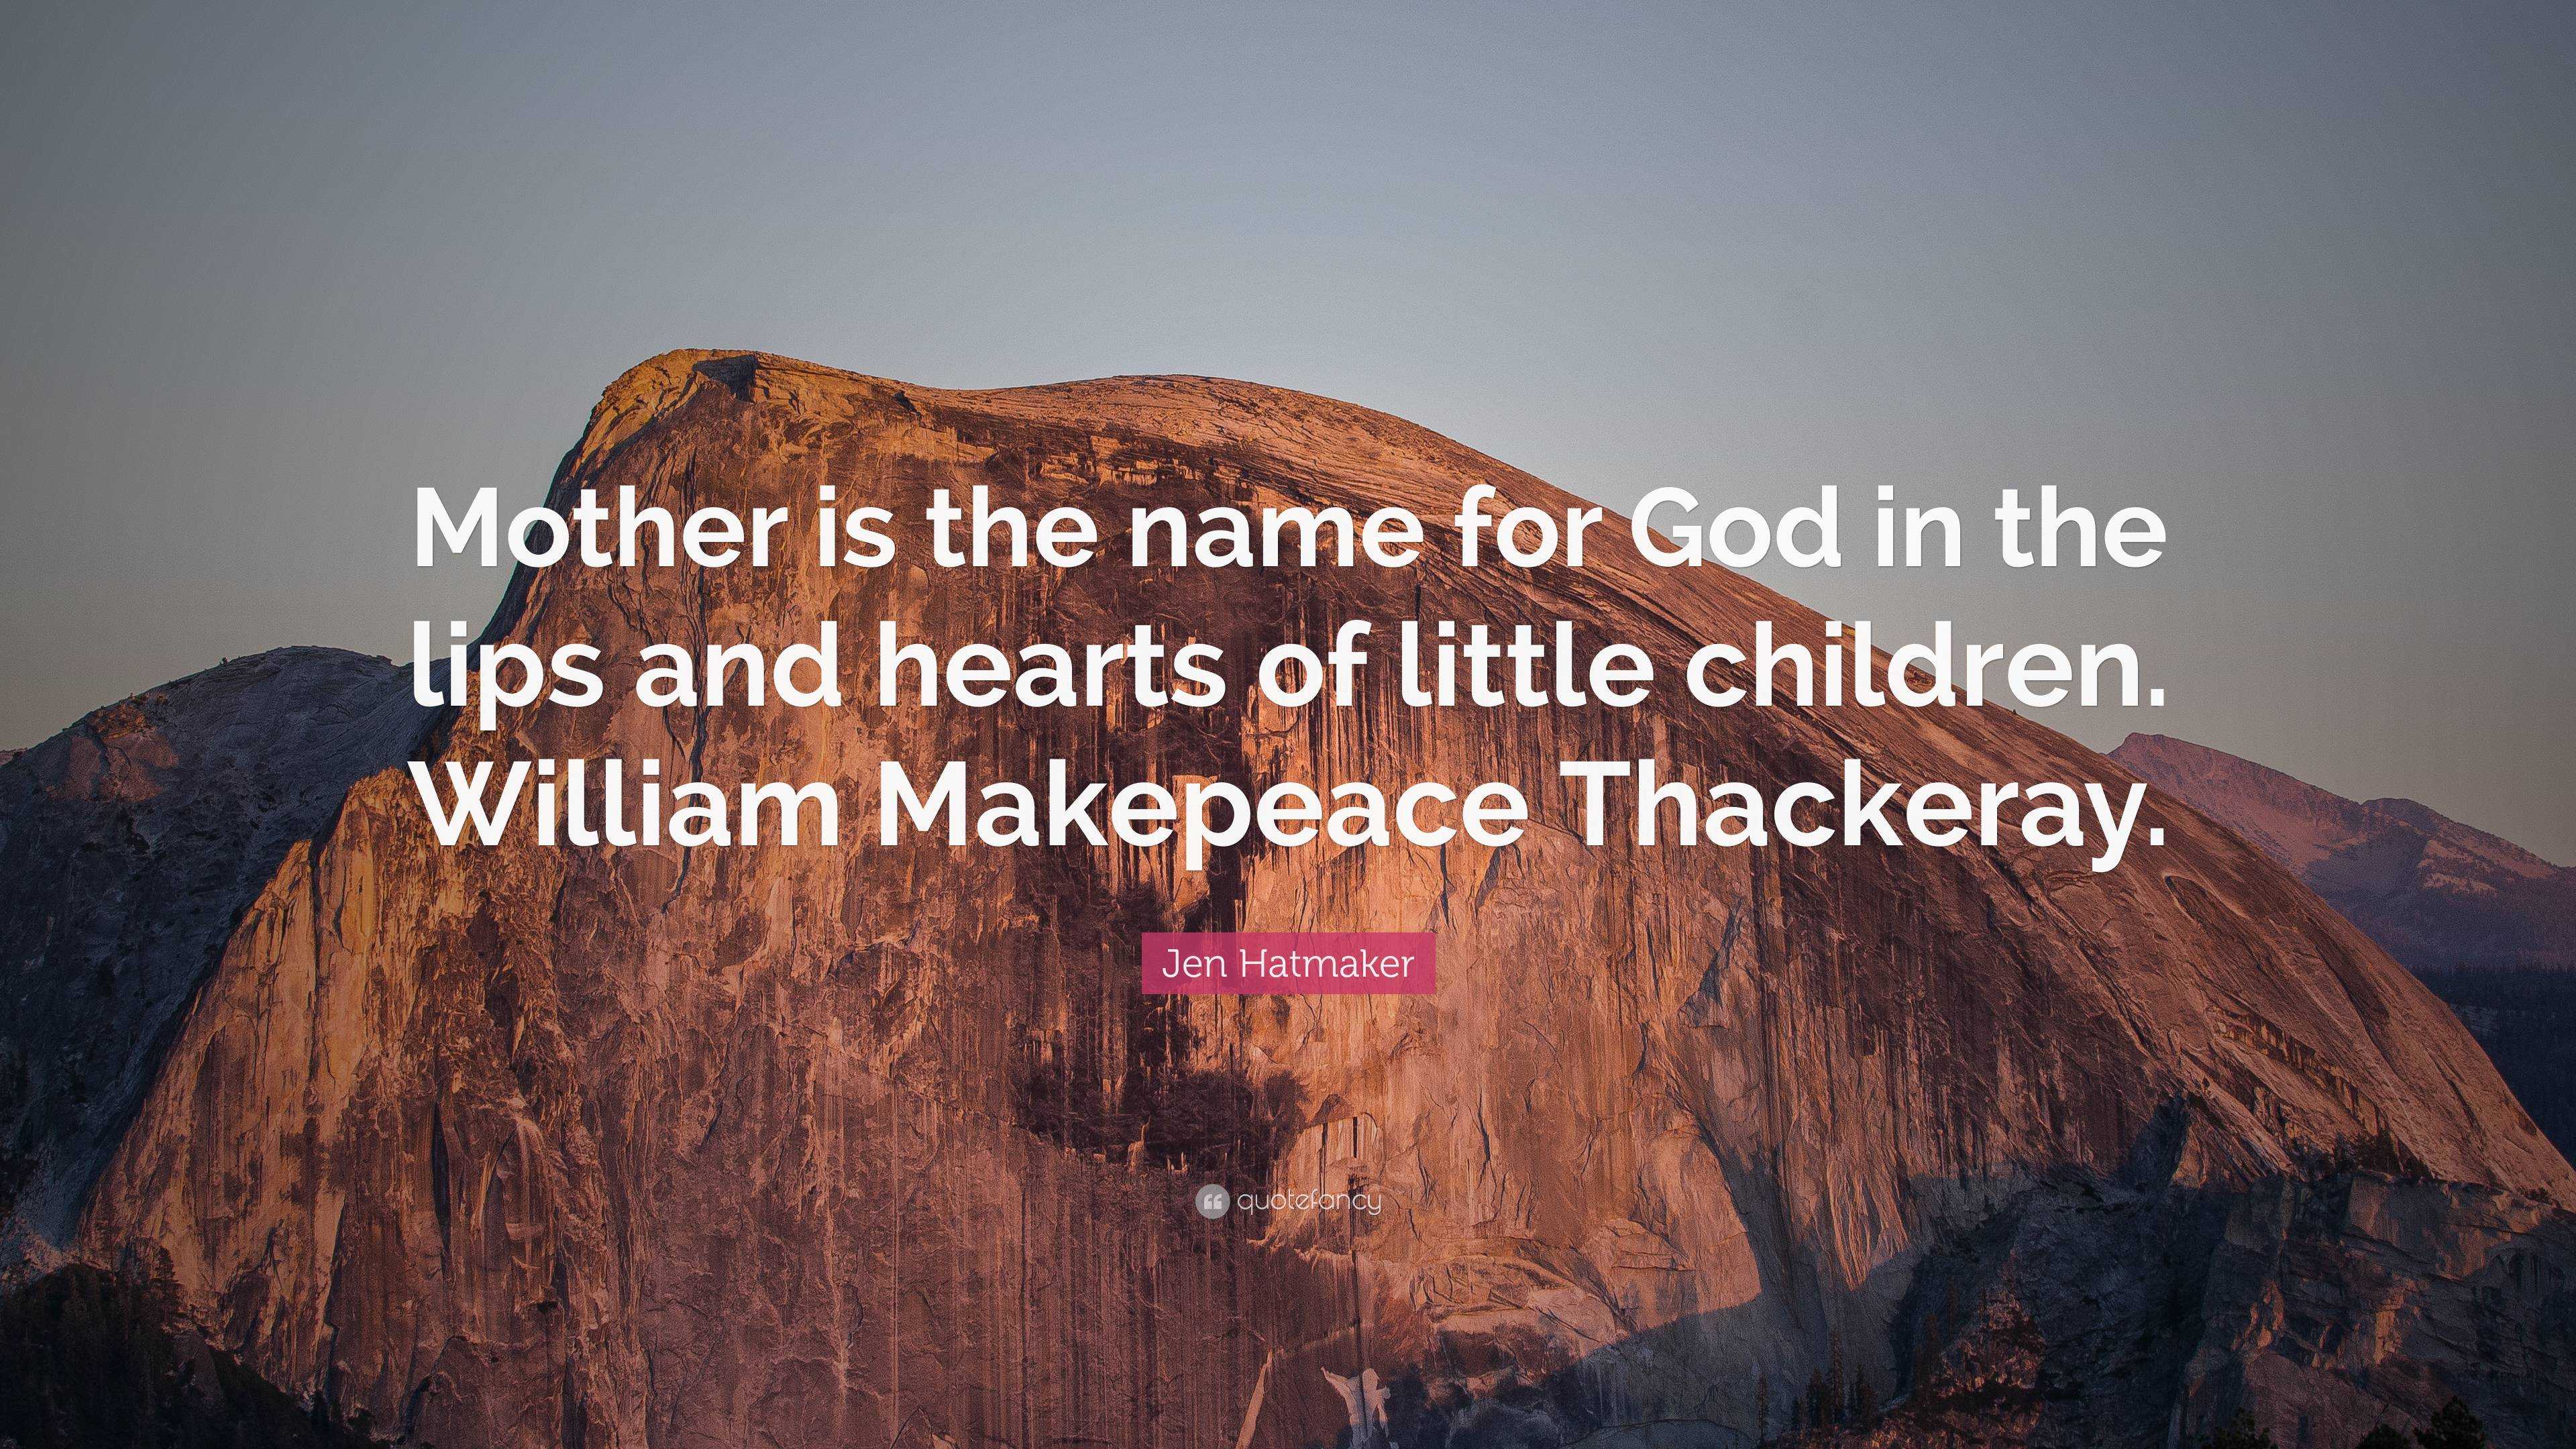 Jen Hatmaker Quote: “Mother is the name for God in the lips and hearts ...